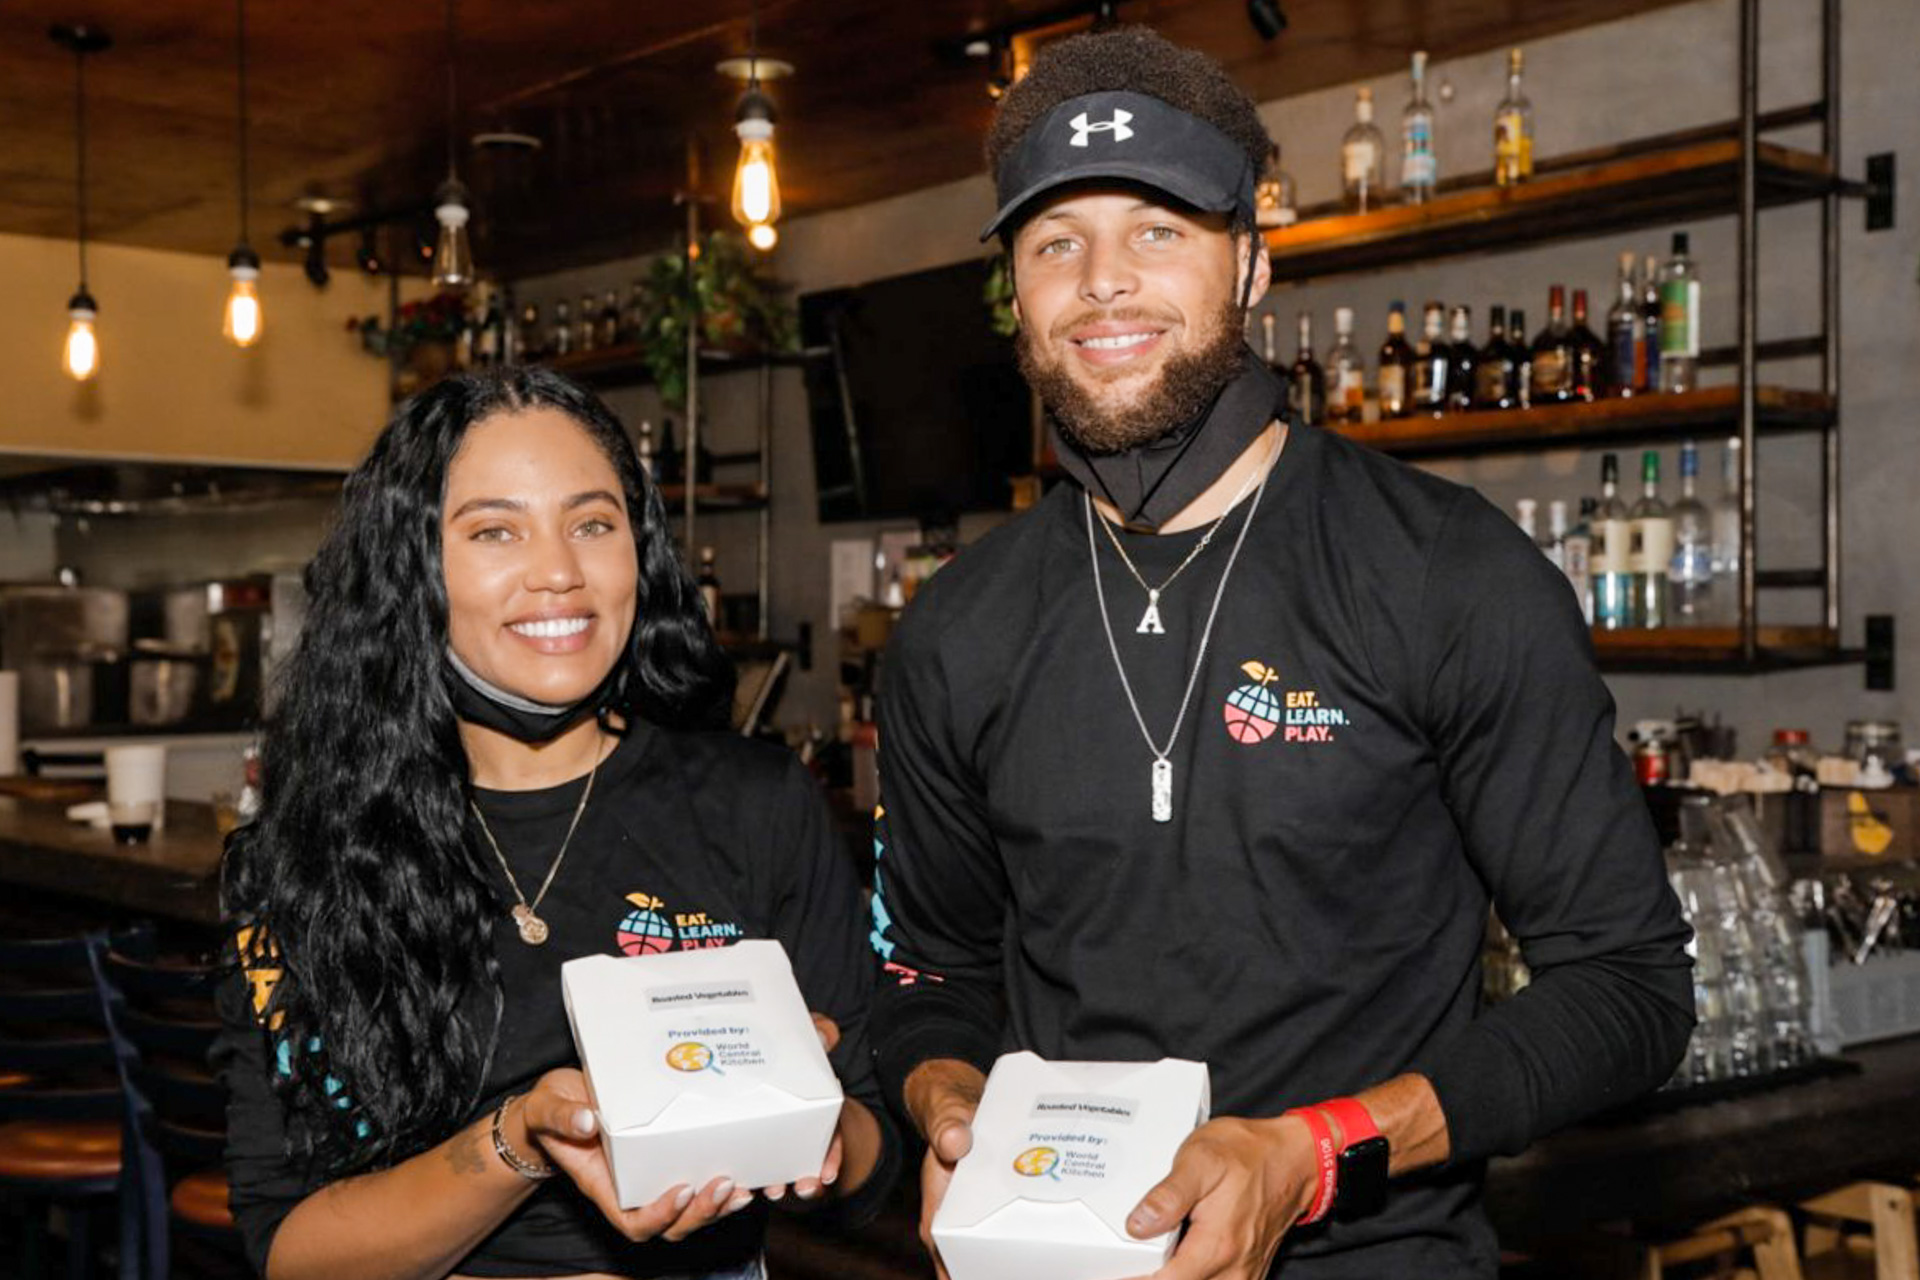 Steph Curry and Ayesha Curry on Philanthropy and The Eat Play